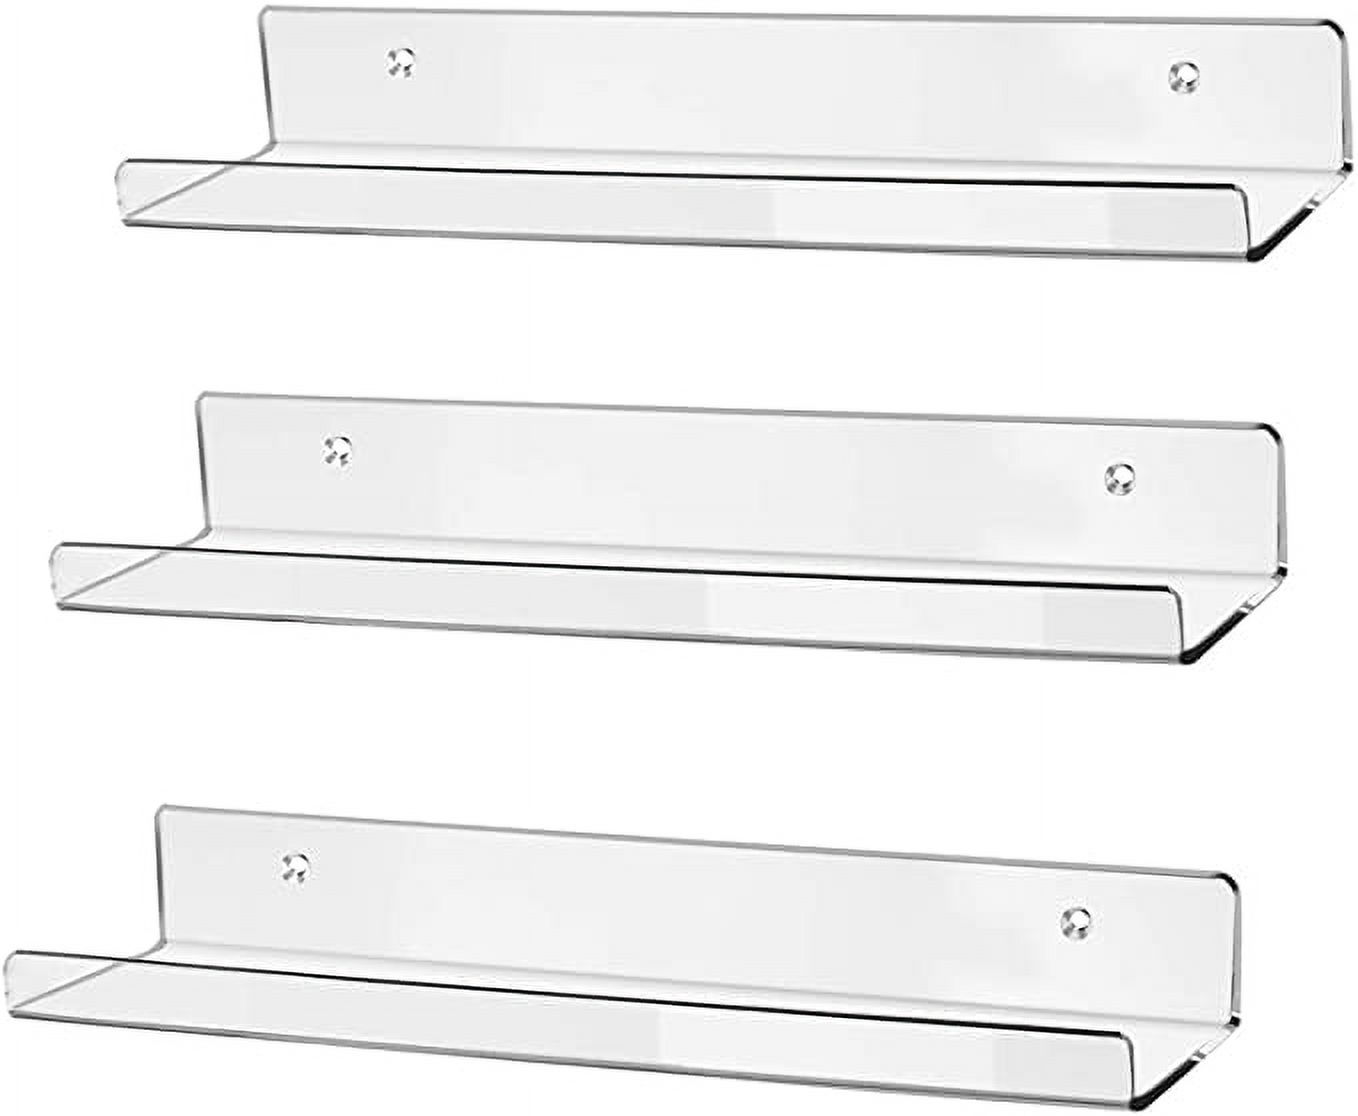 HBlife 15" Clear Acrylic Floating Wall Ledge Shelf, Wall Mounted Nursery Kids Bookshelf, Invisible Spice Rack, Clear 5MM Thick Bathroom Storage Shelves Display Organizer, 15" L x 4" D x 2" H, Set of 3 - image 1 of 6